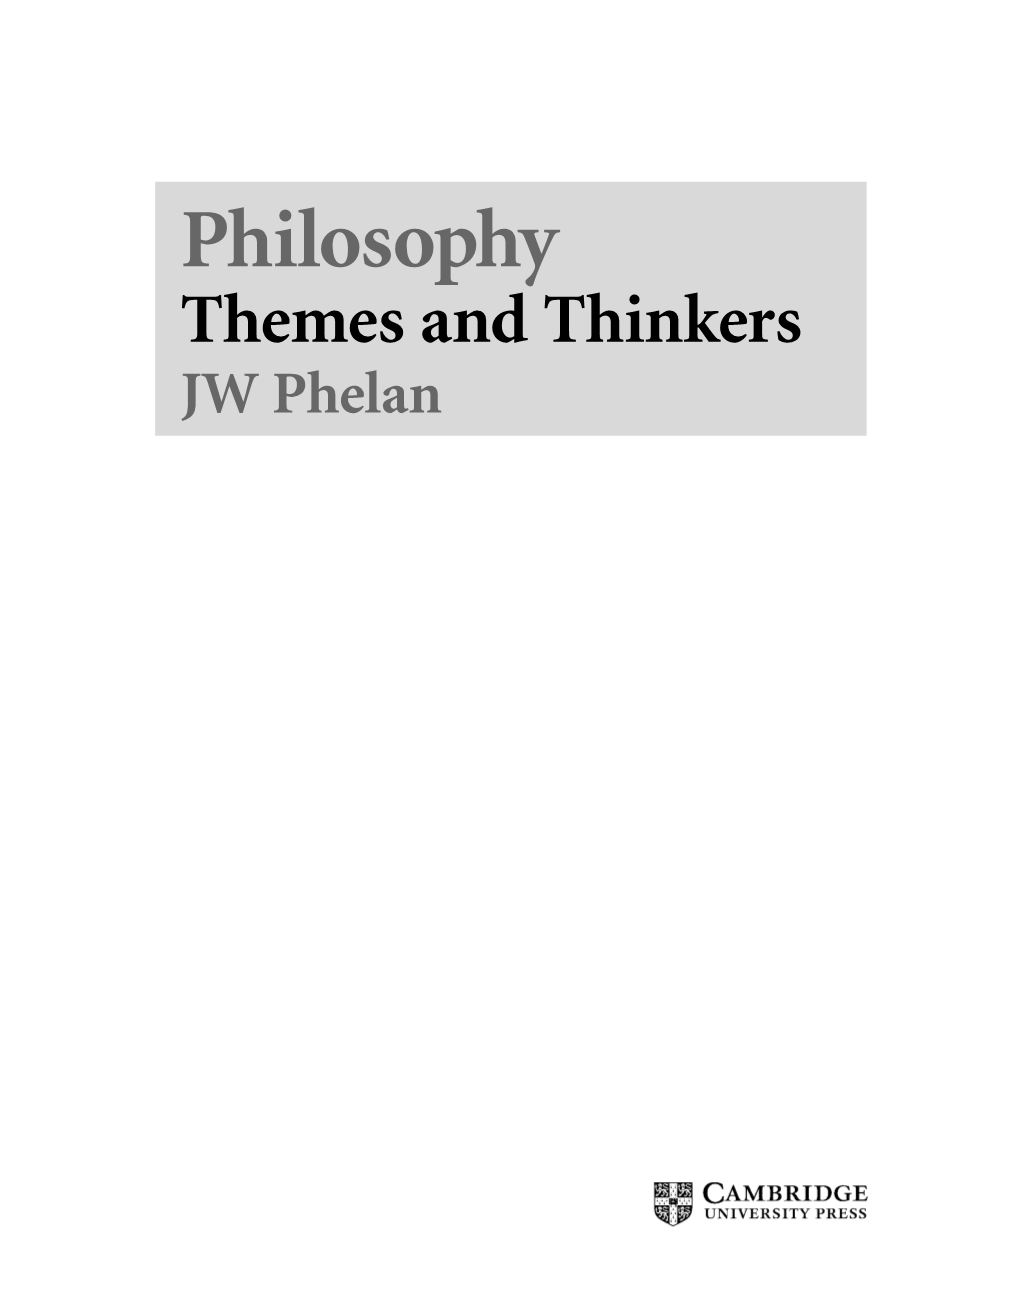 Philosophy Themes and Thinkers JW Phelan to My Parents